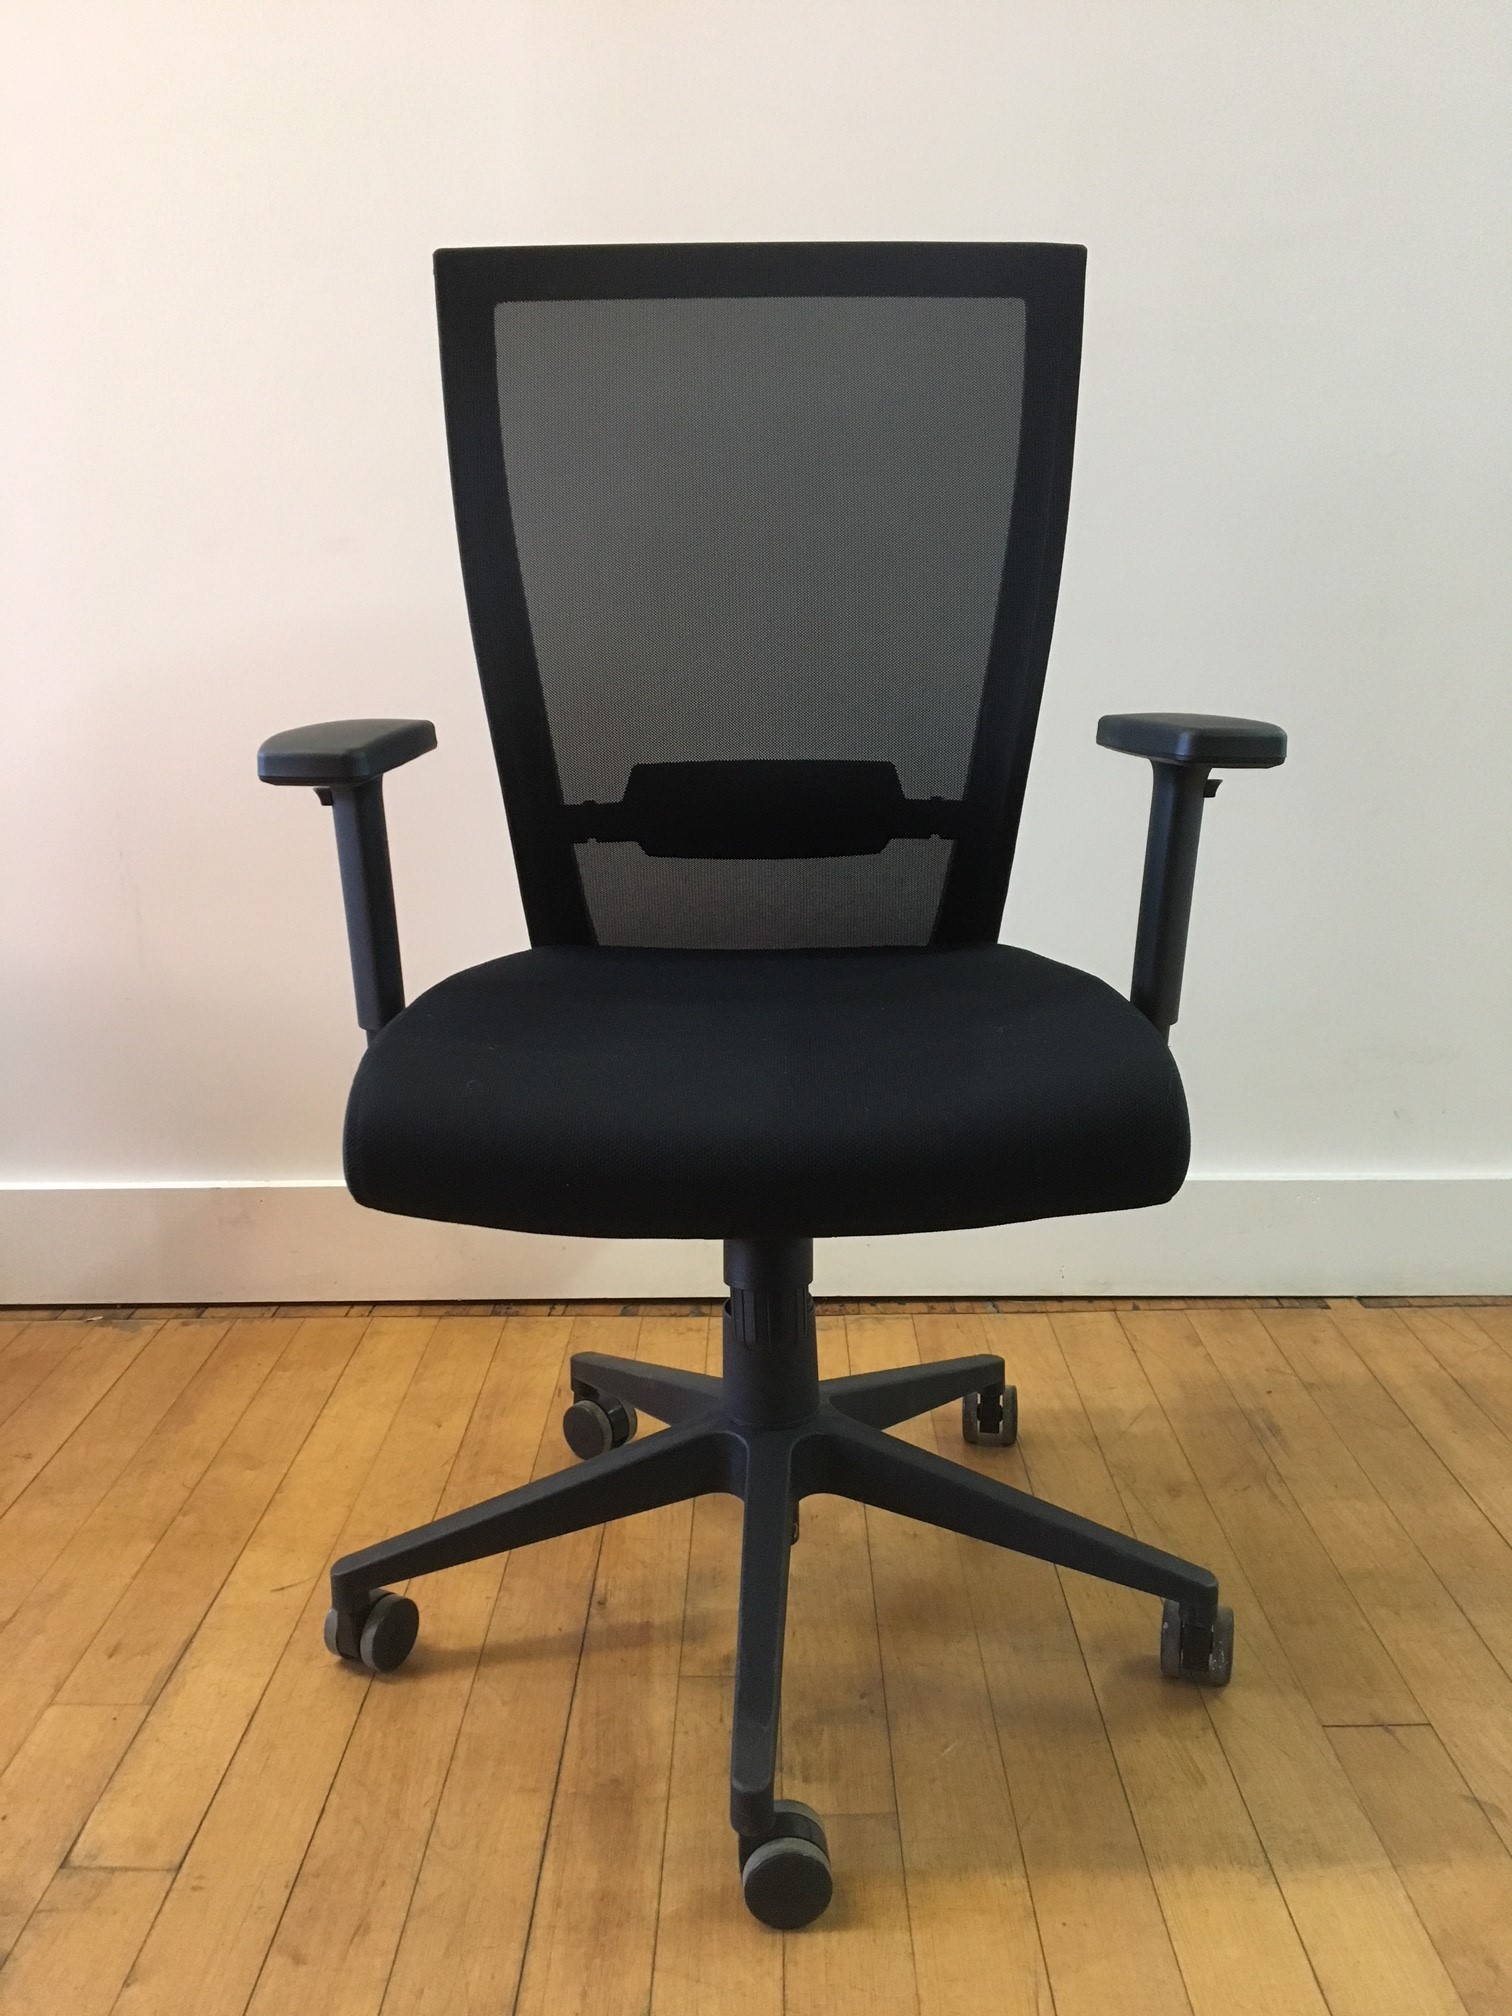 C61495 - Used Brode Seating